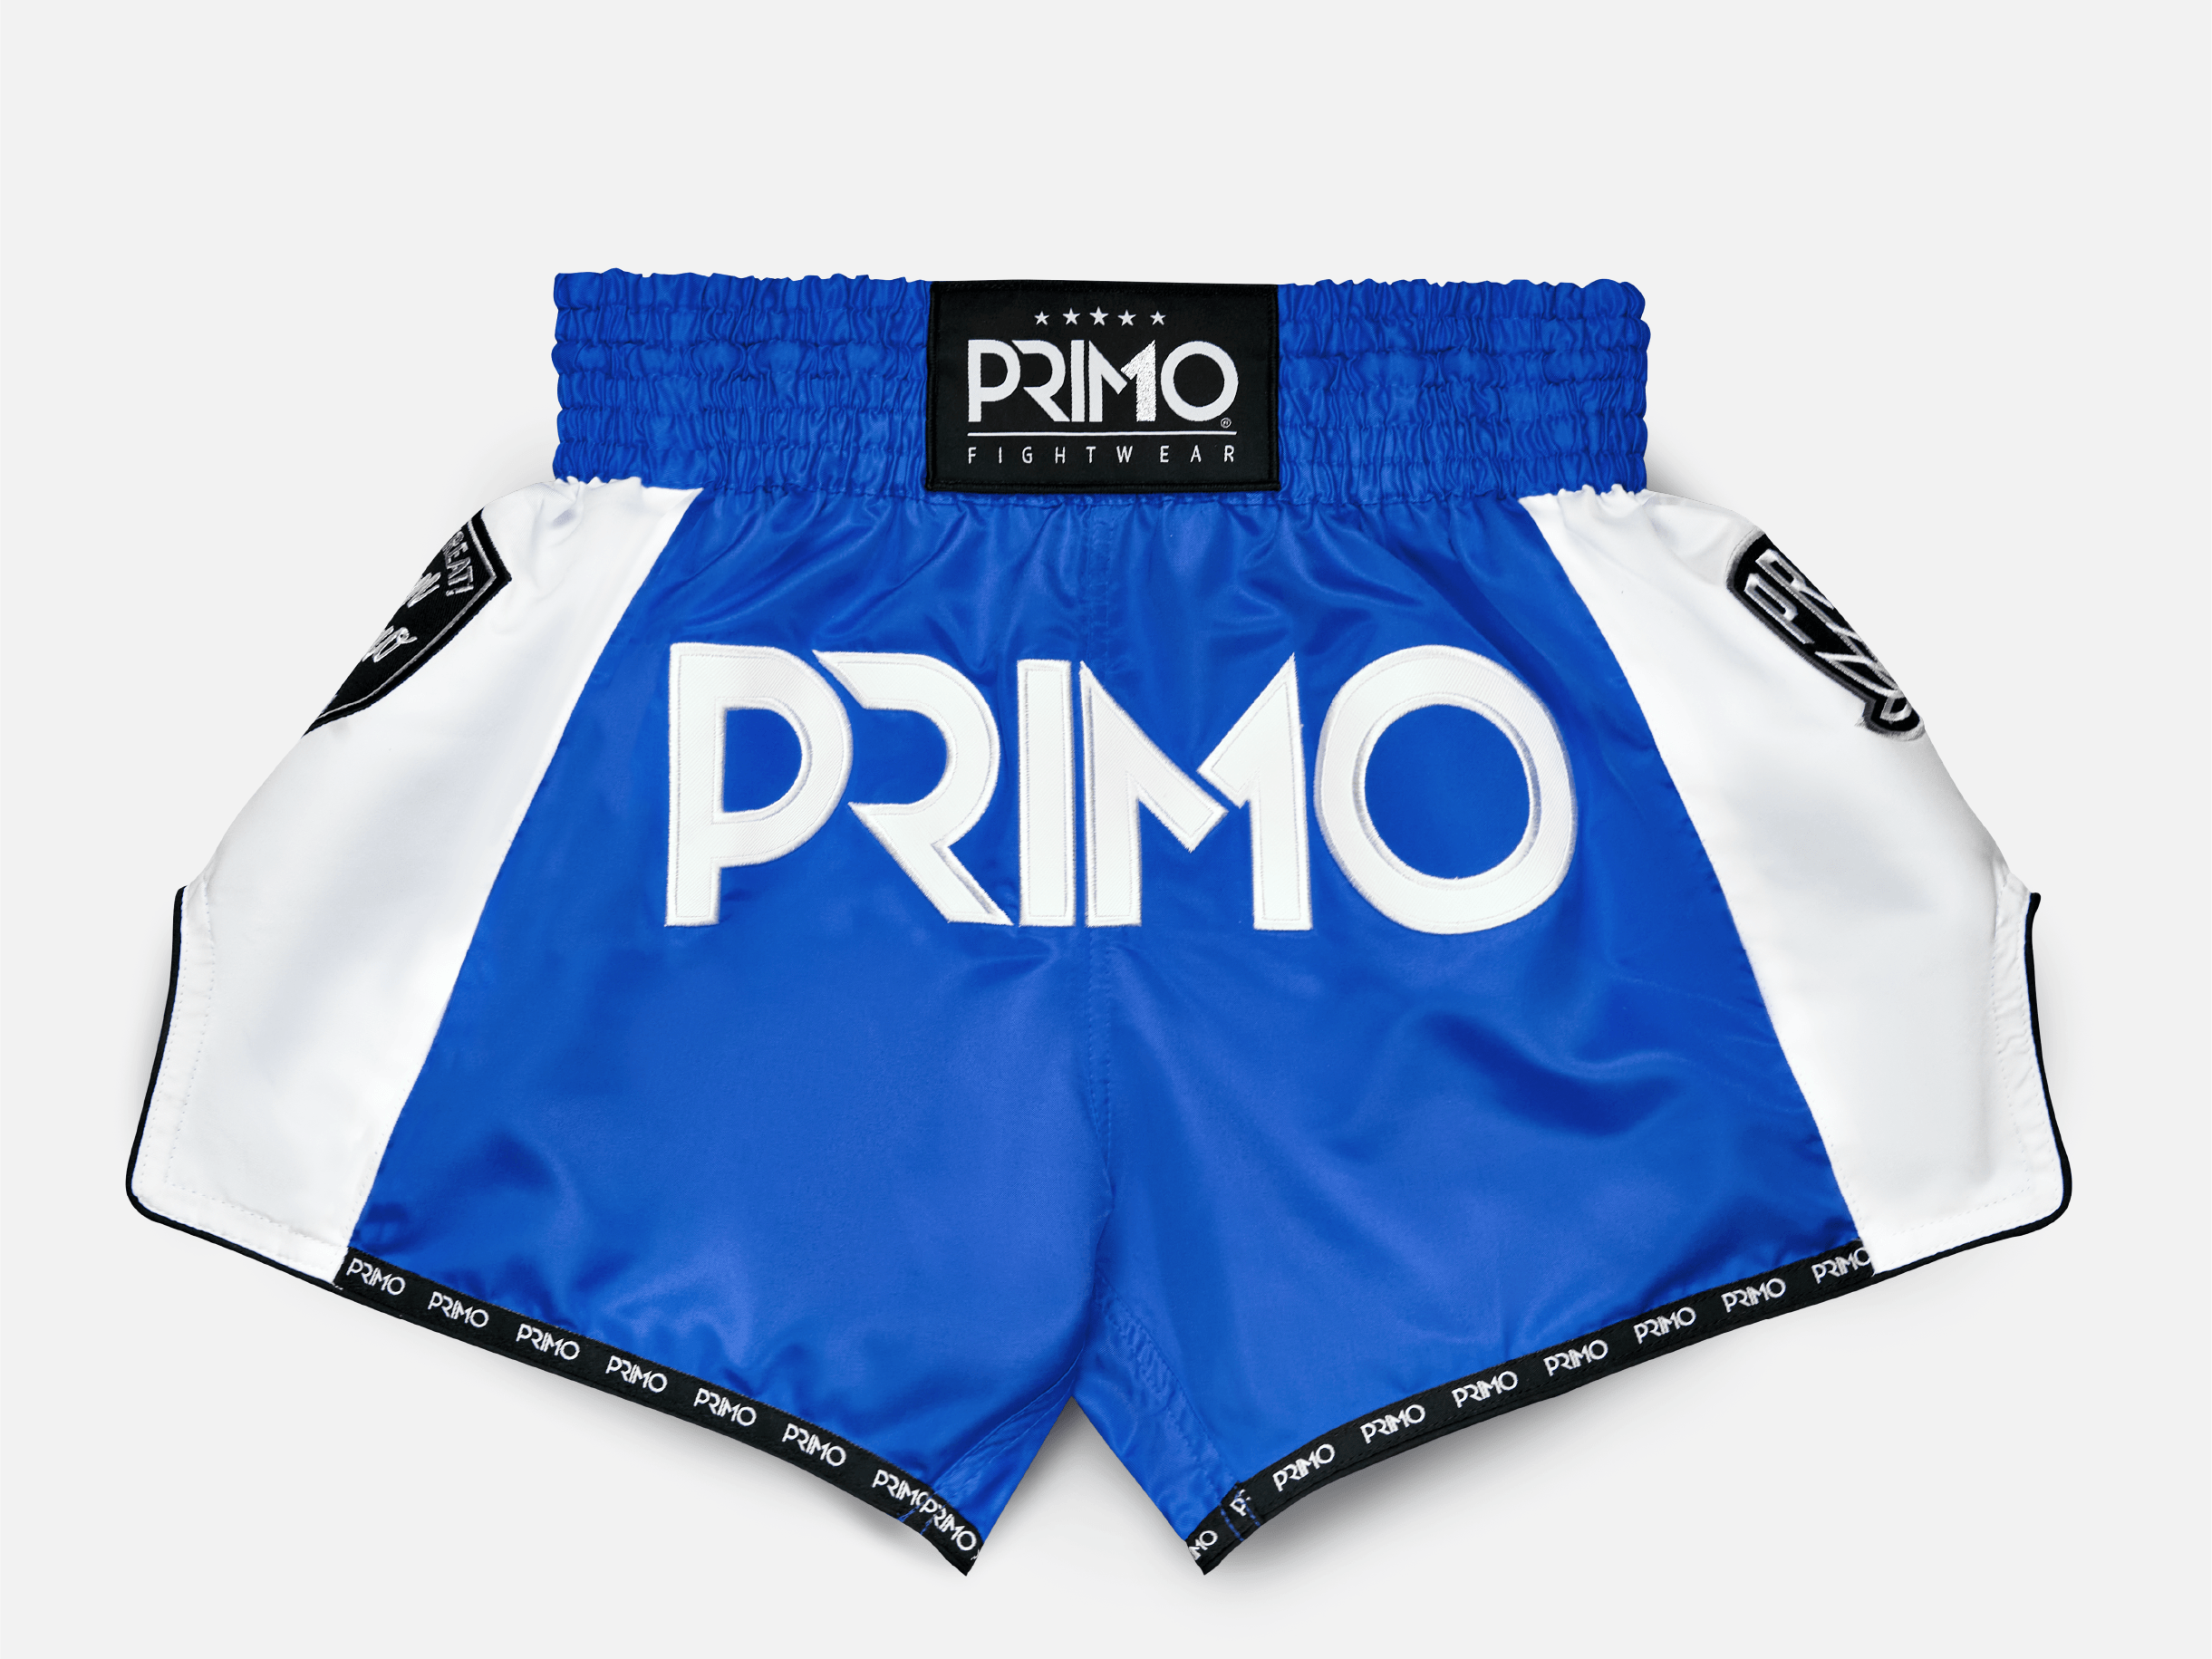 Primo Fight Wear Official Muay Thai Shorts - Free Flow Series - Stadium Classic Blue